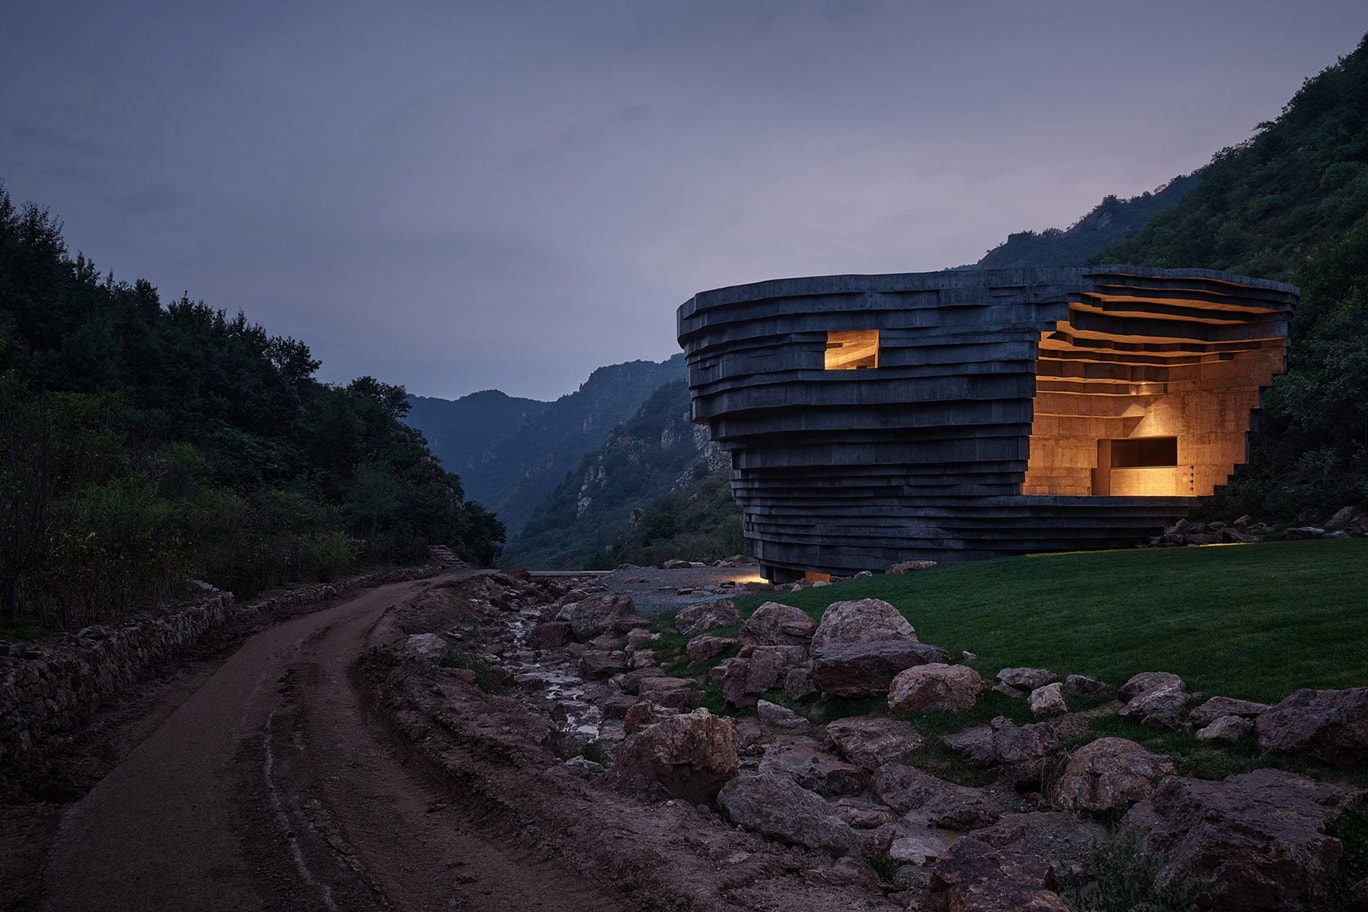 Open Architecture Completes "The Chapel of Sound" Rock-Like Concert Hall mountainous valley great wall of china concrete natural local stone reflection amphitheater stage beijing Li Hu Huang wenjiang news